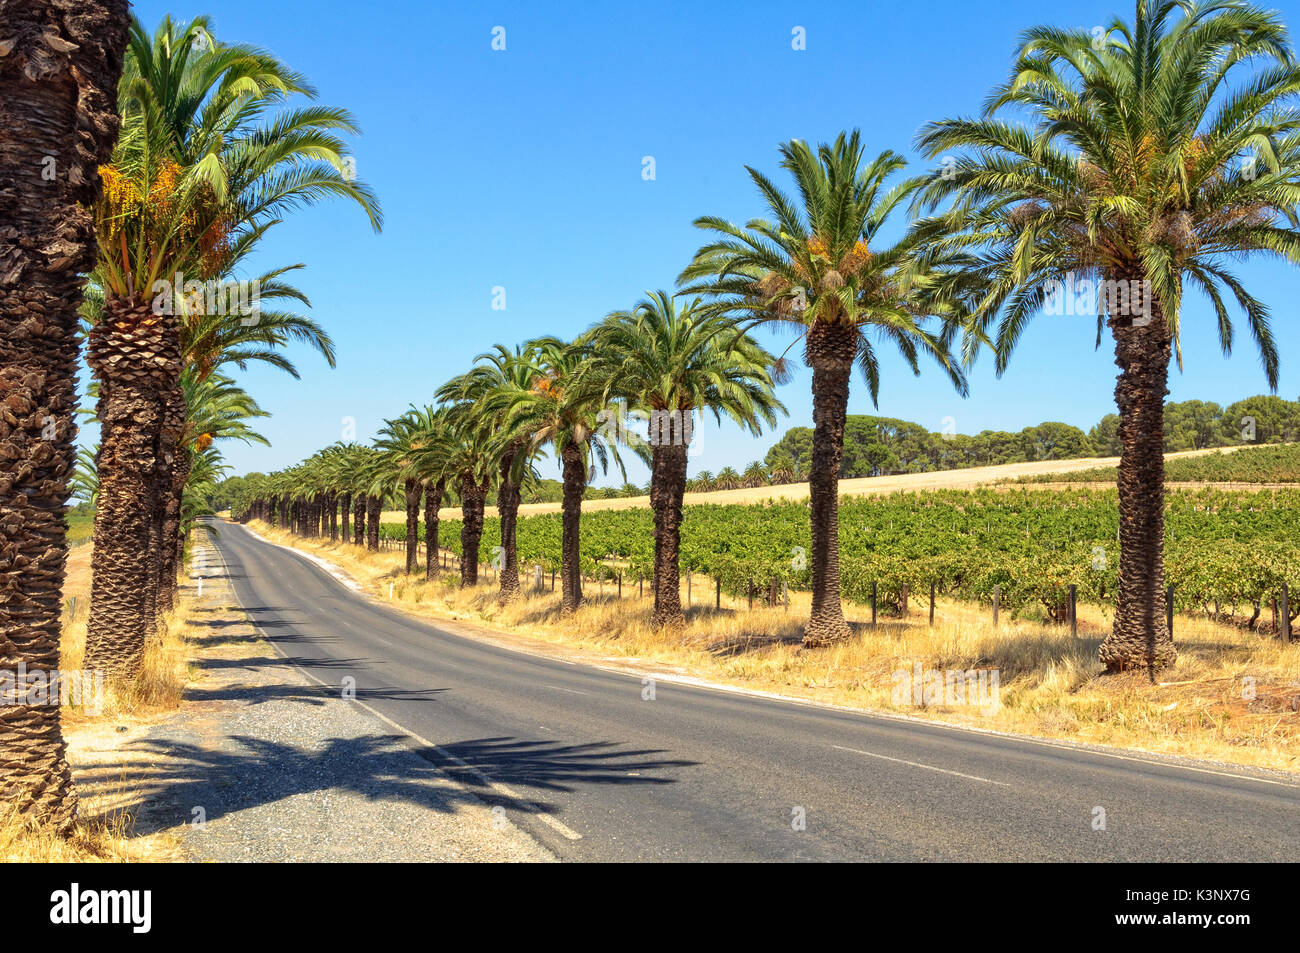 Seppeltsfield Road boasts some of the Barossa Valley’s most famous vineyards, wineries and gourmet destinations - SA, Australia Stock Photo